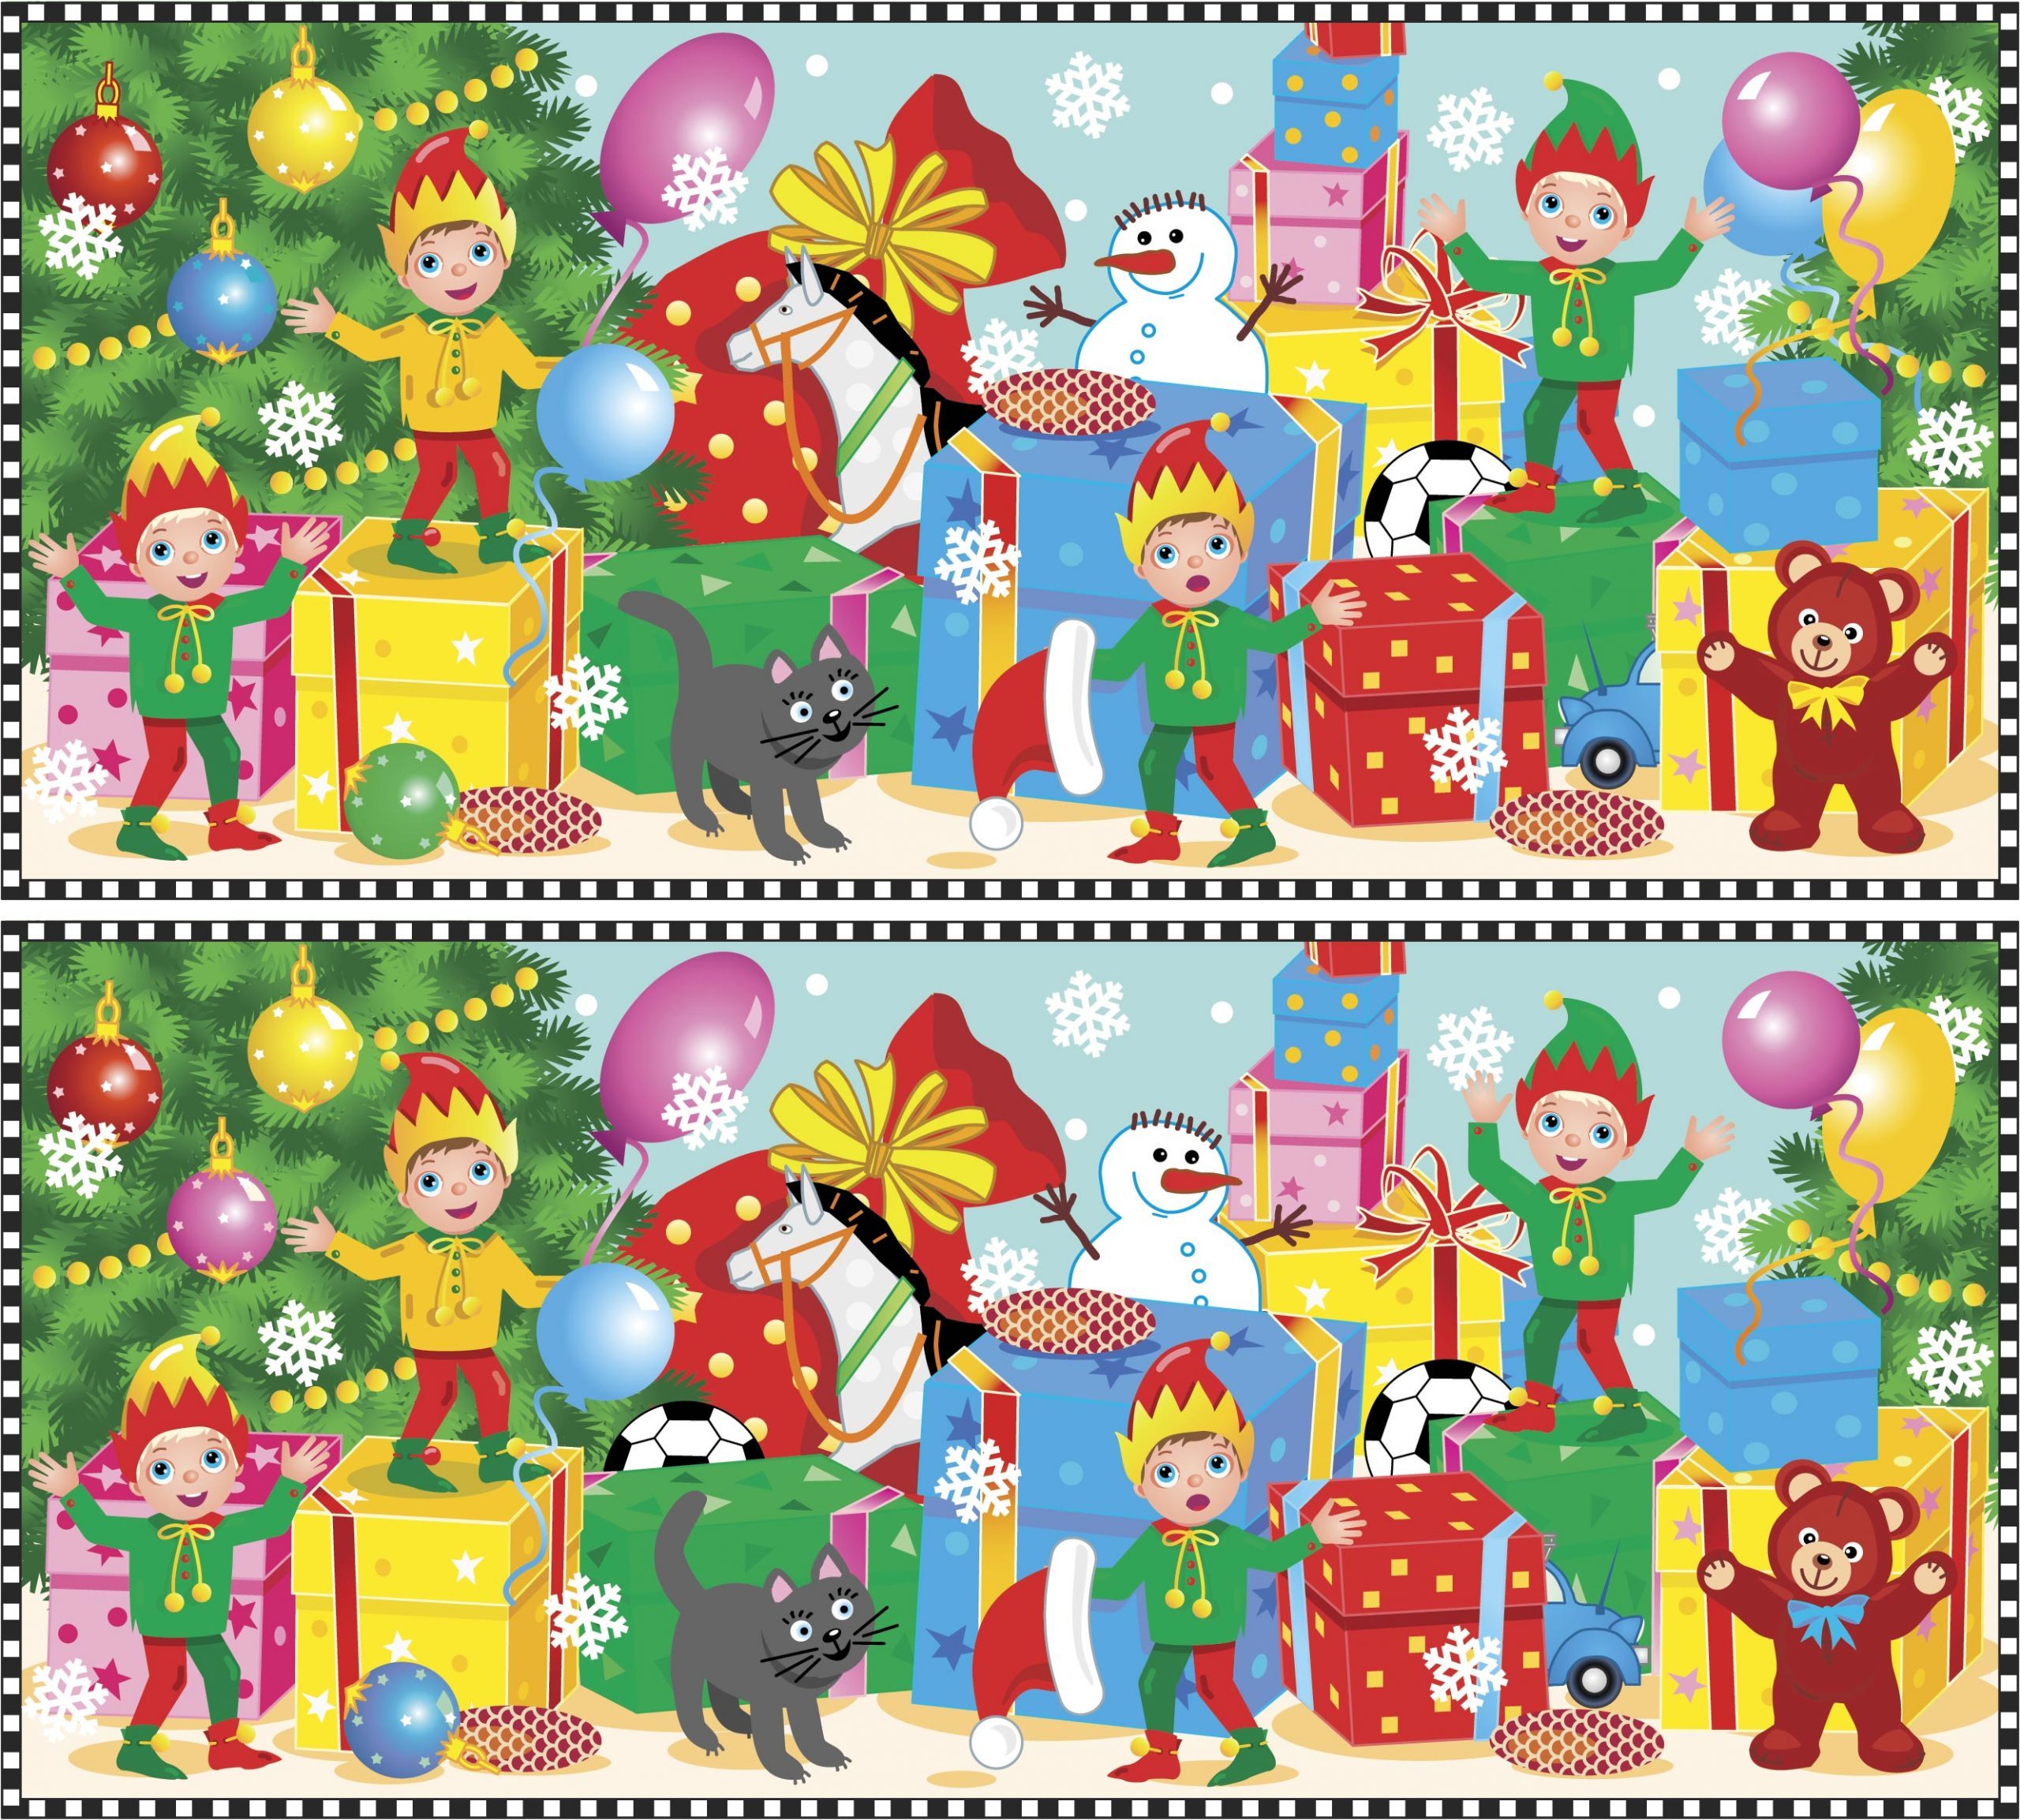 Christmas or New Year visual puzzle: Find the ten differences between the two pictures of elves waiting for Santa to show their work done. Answer included.